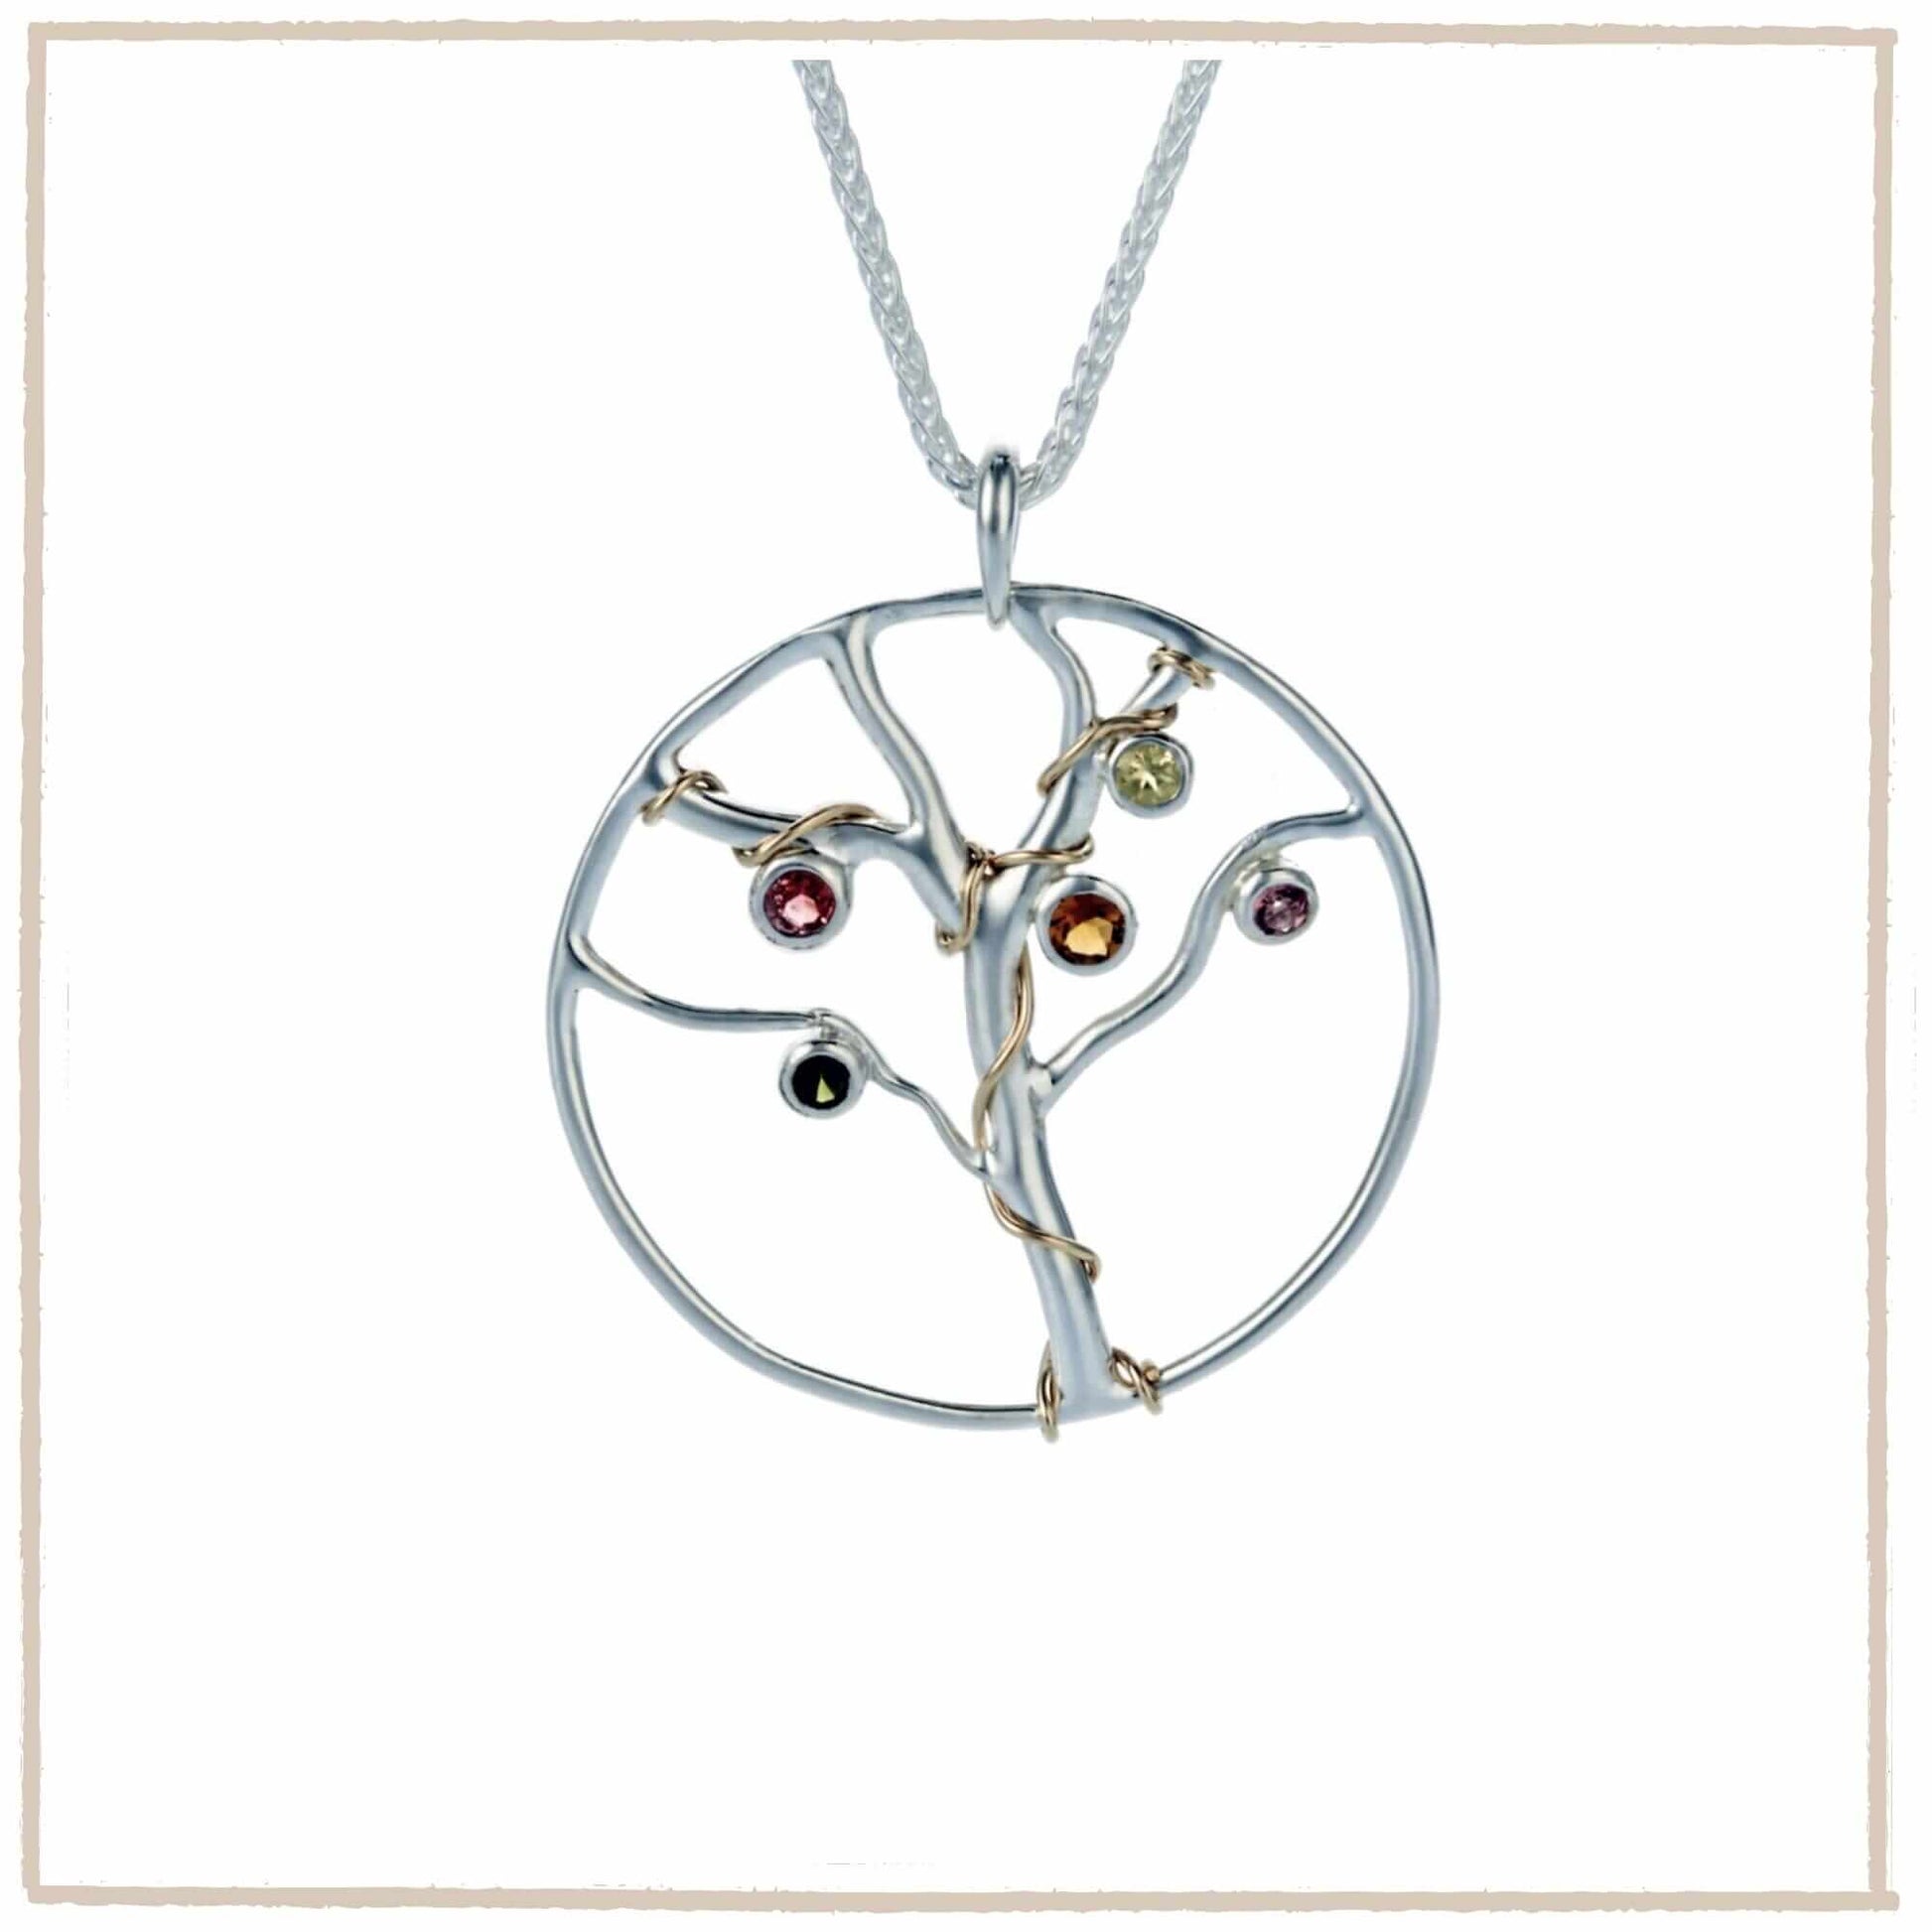 Tourmaline Tree Of Life Sterling Silver Pendant - Twelve Silver Trees